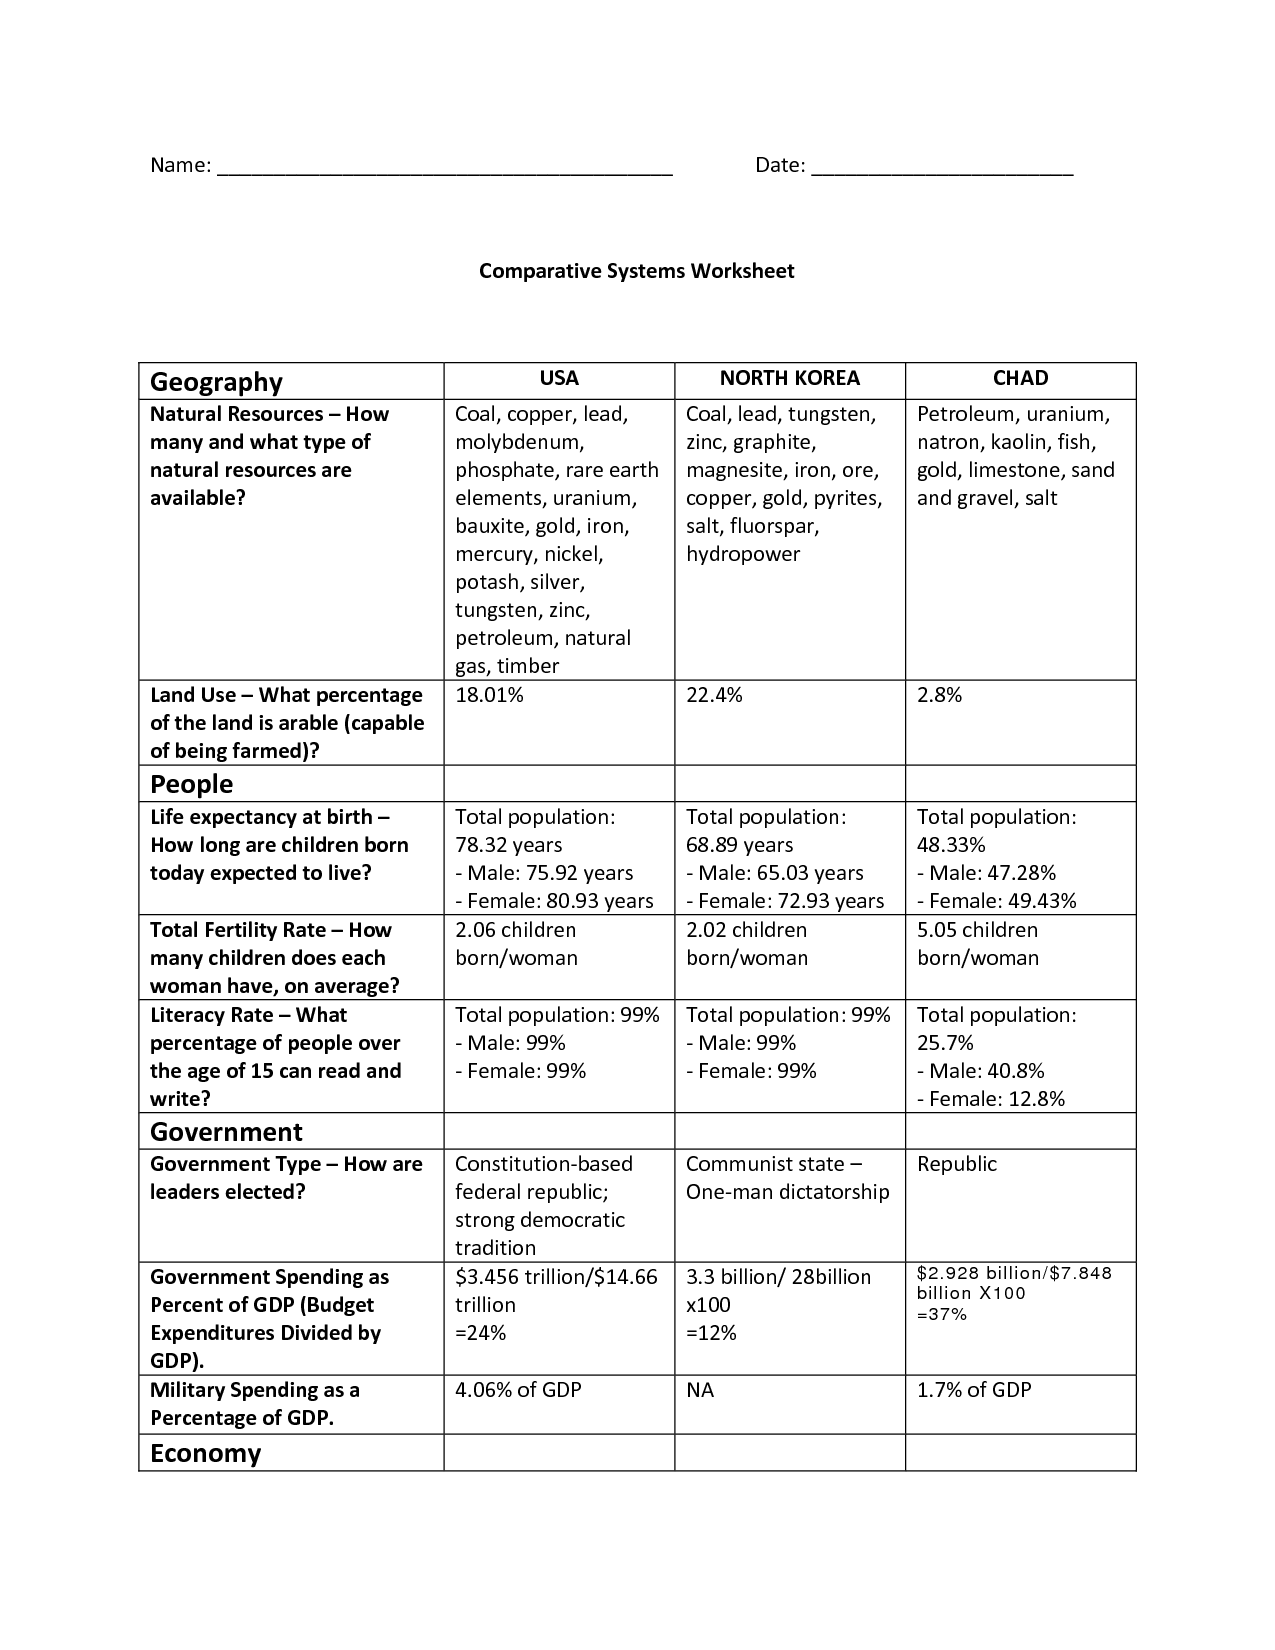 Economic Systems Worksheet Answers